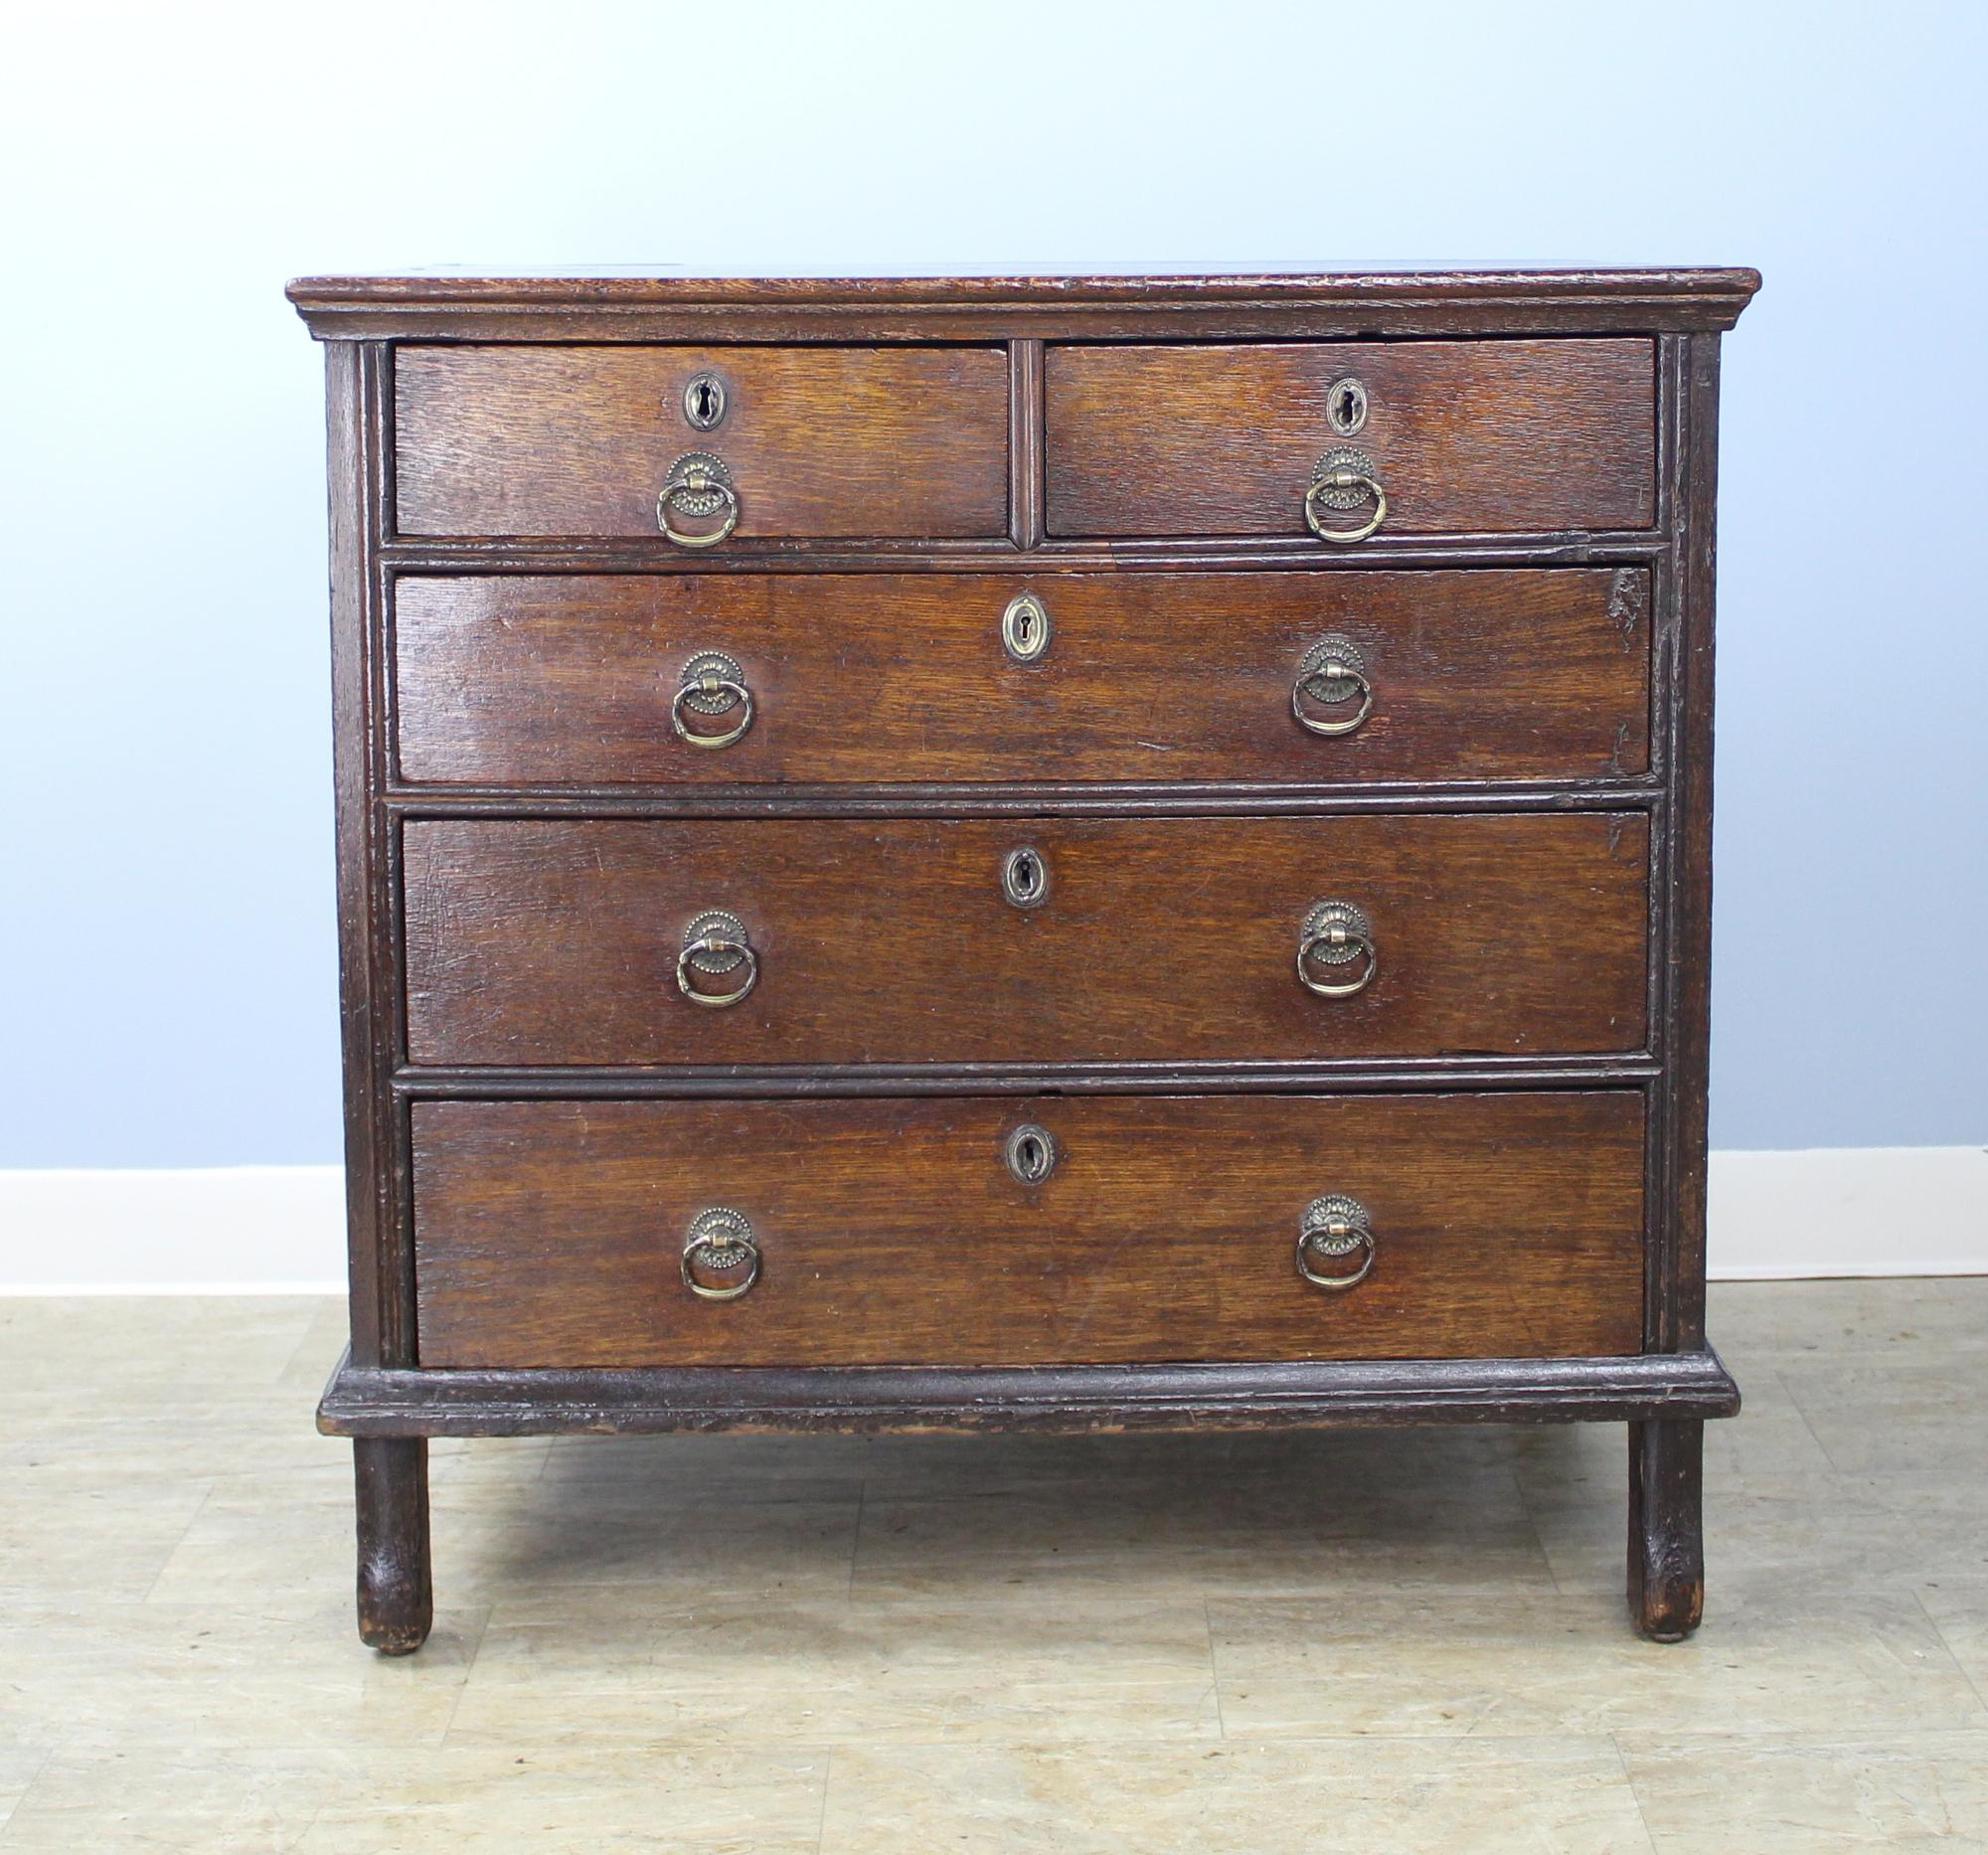 An exquisite chest of drawers, English, circa 1700. The stile feet are original to the piece, as are the drawer pulls and keyholes. The oak is finely grained and patinated, with good top molding, and the interior of the piece is clean and in all